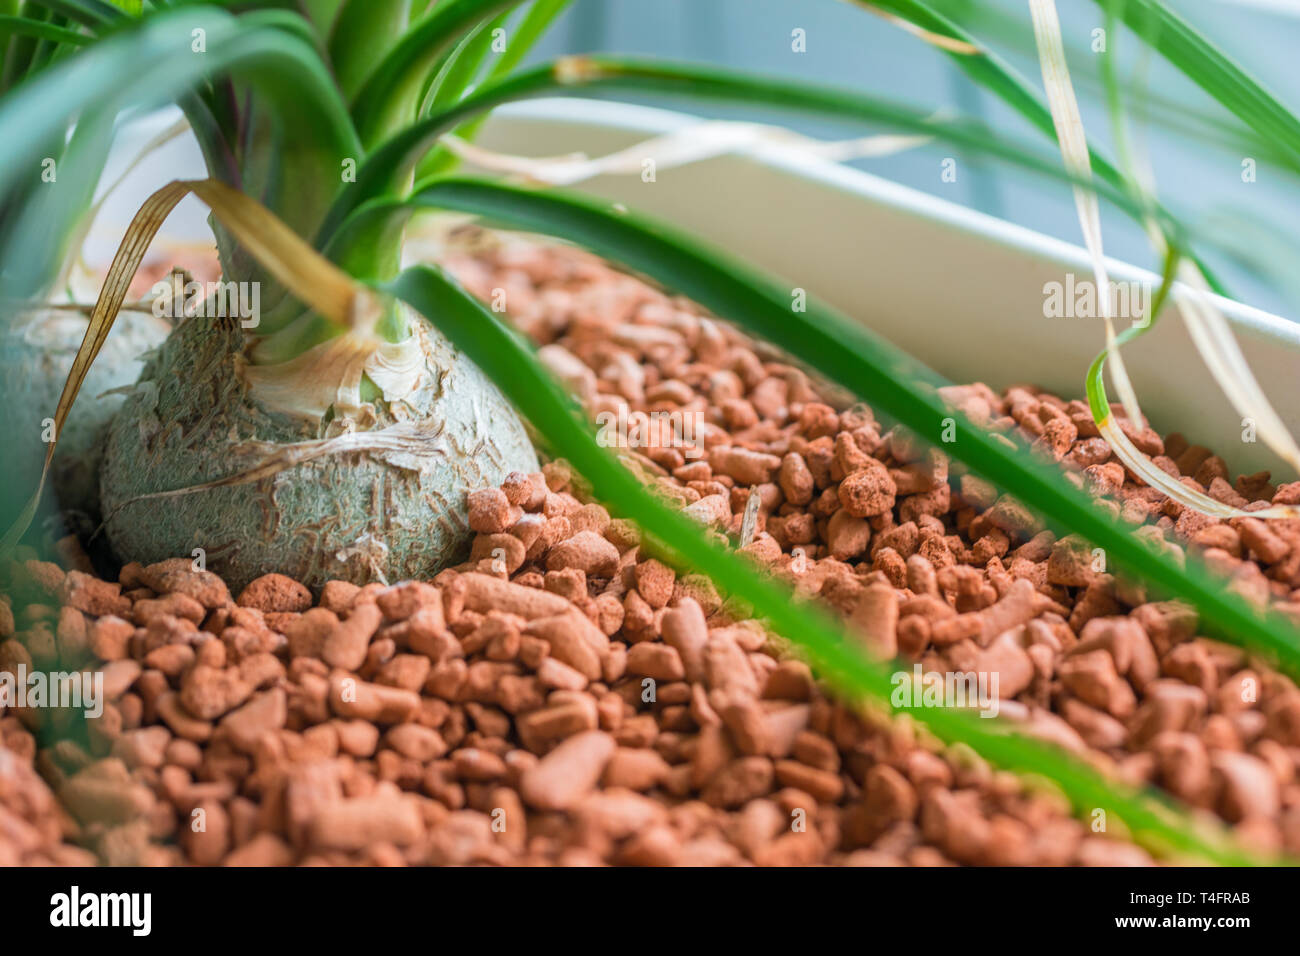 Plant grows in granules in a flowerpot Stock Photo